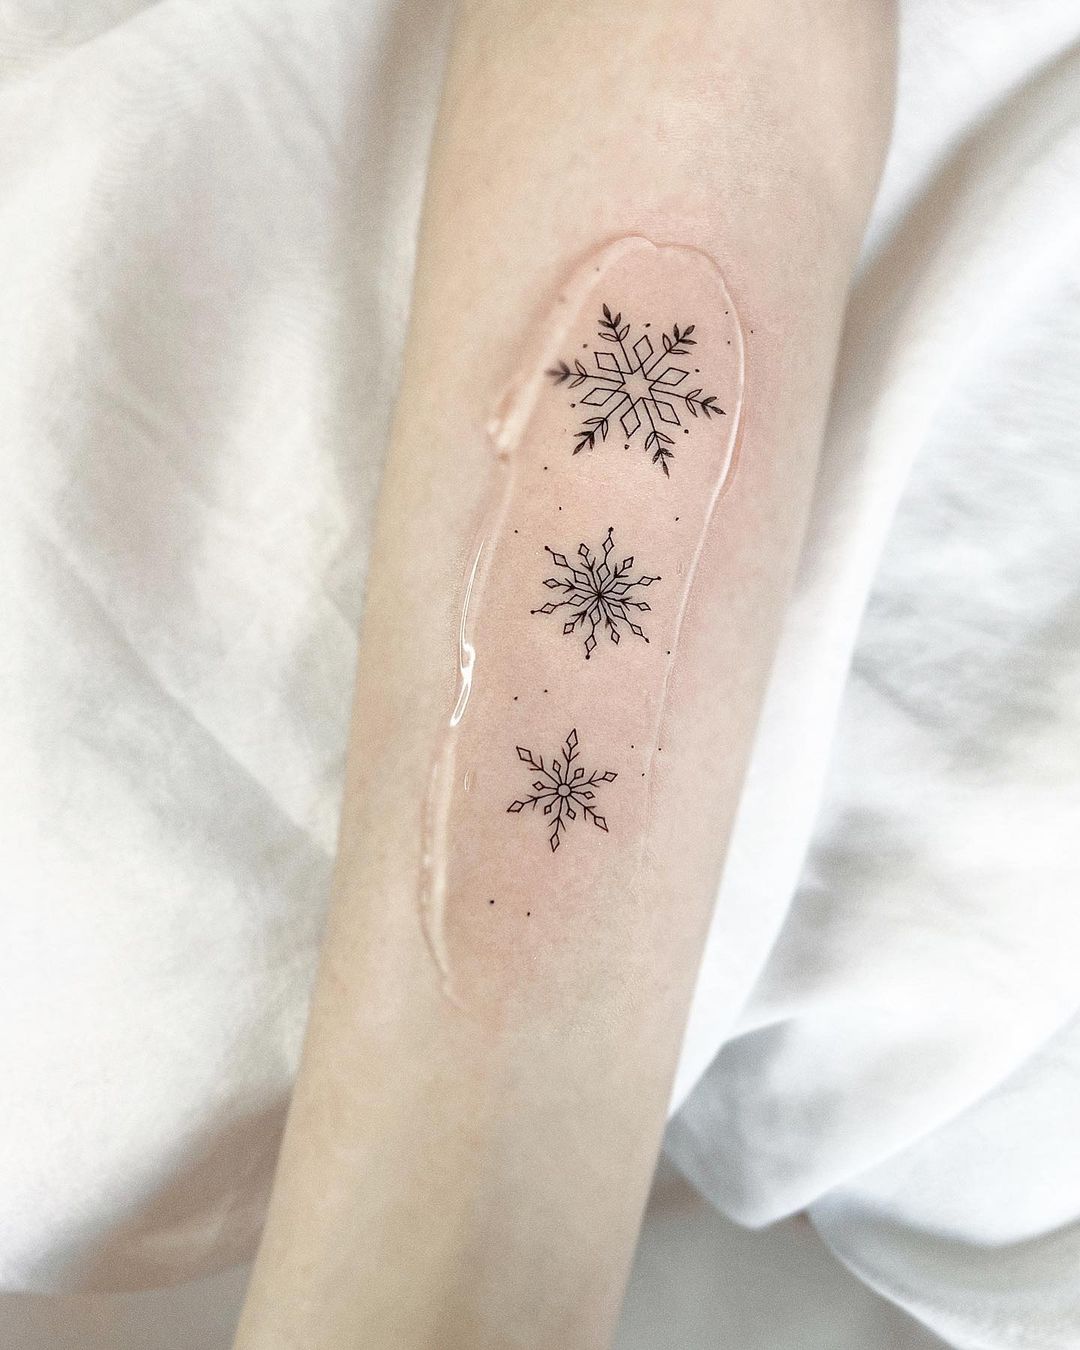 Snowflake tattoo on forearm by mariash.ink